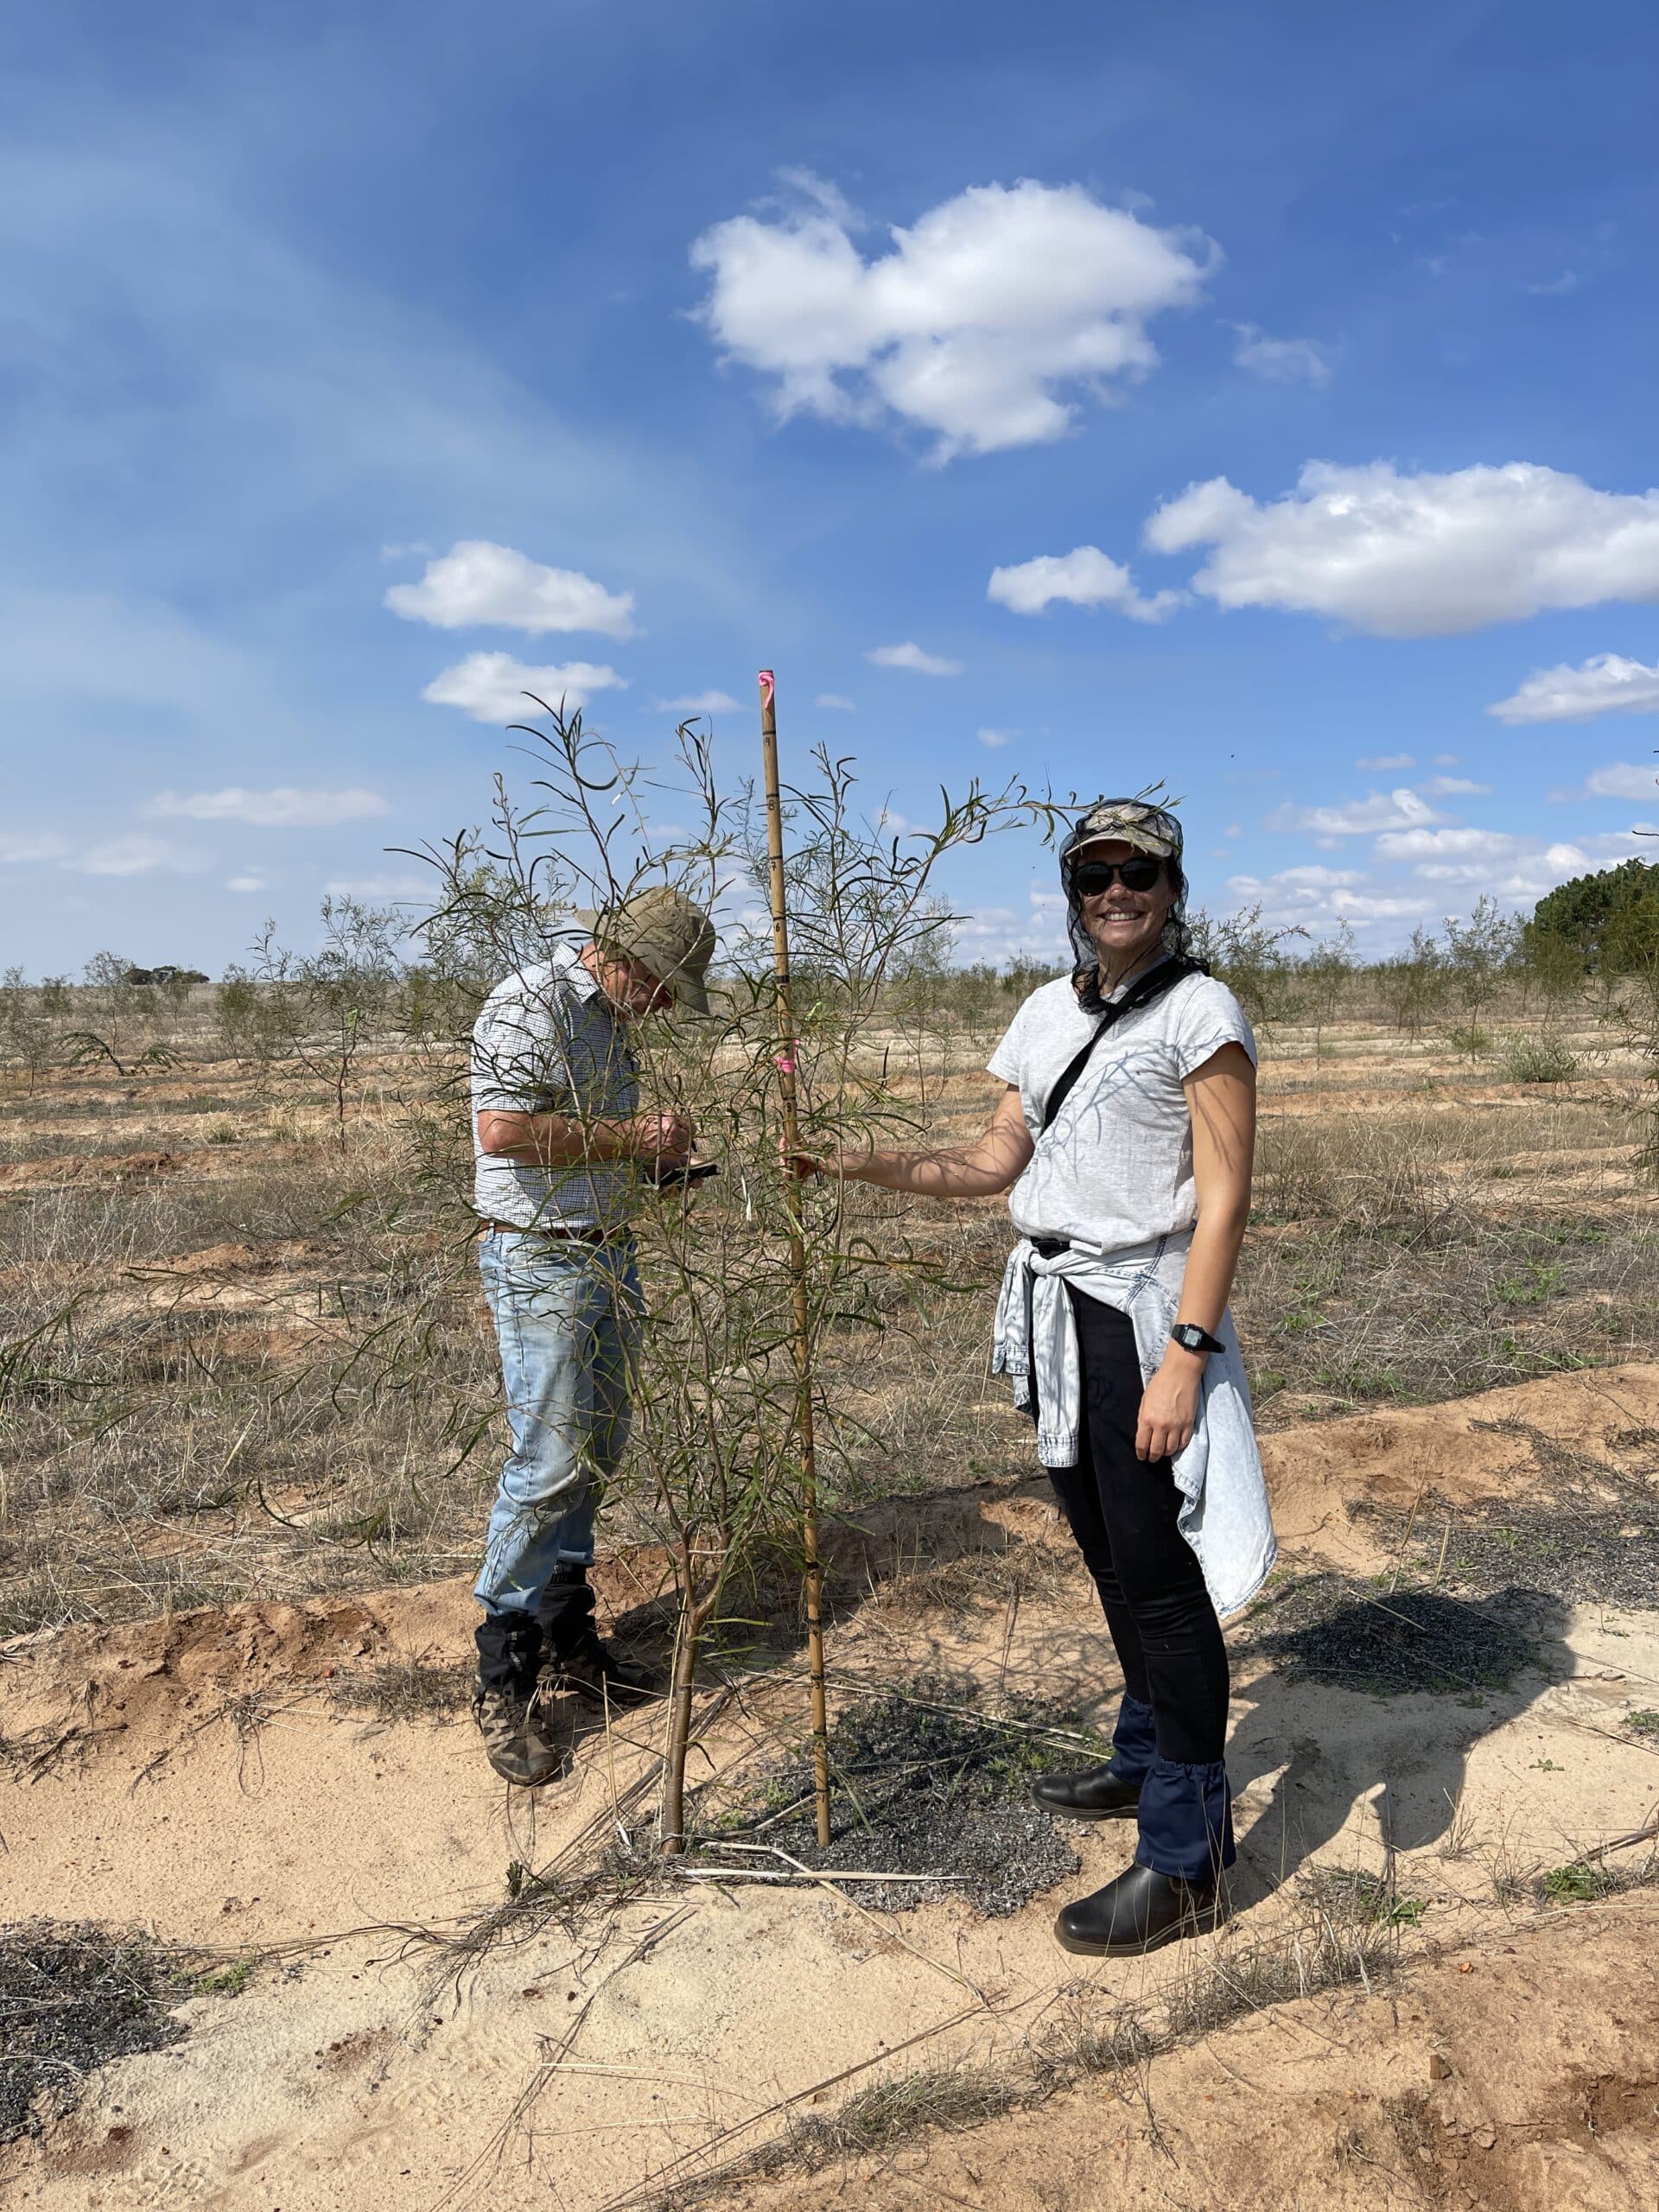 Women smiling next to an Acacia acuminata plant holding a measuring stick with a man behind the plant looking down at a phone in his hand